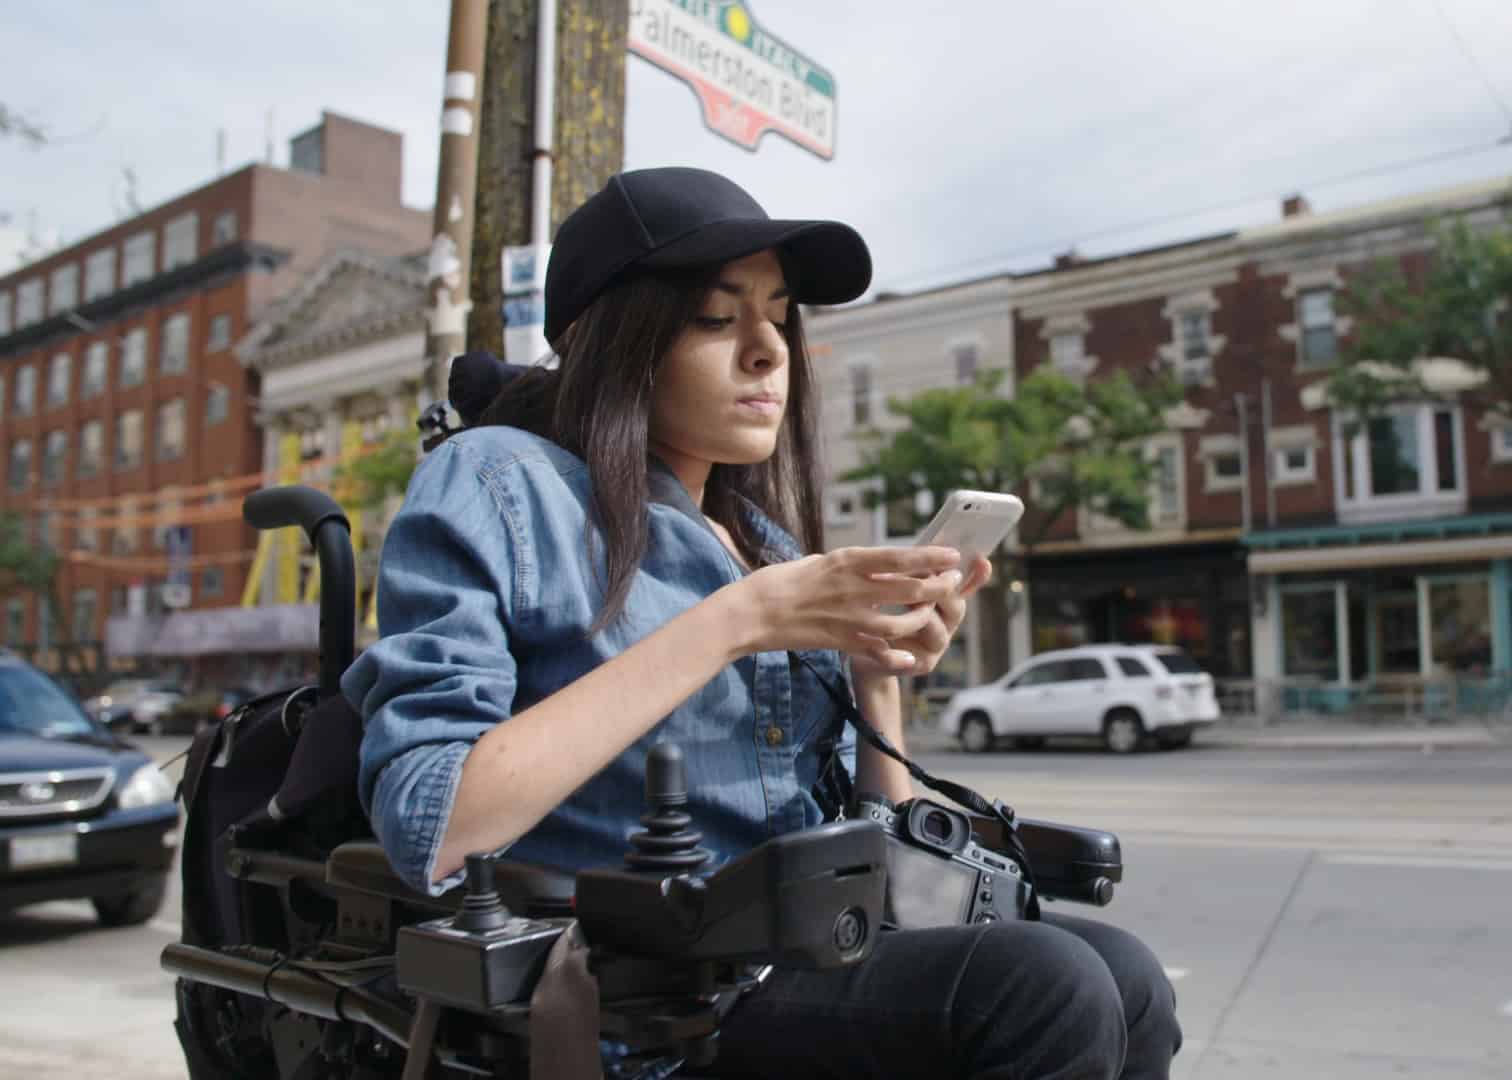 Maayan Ziv sitting in a power chair on an urban street and scrolling on her phone.